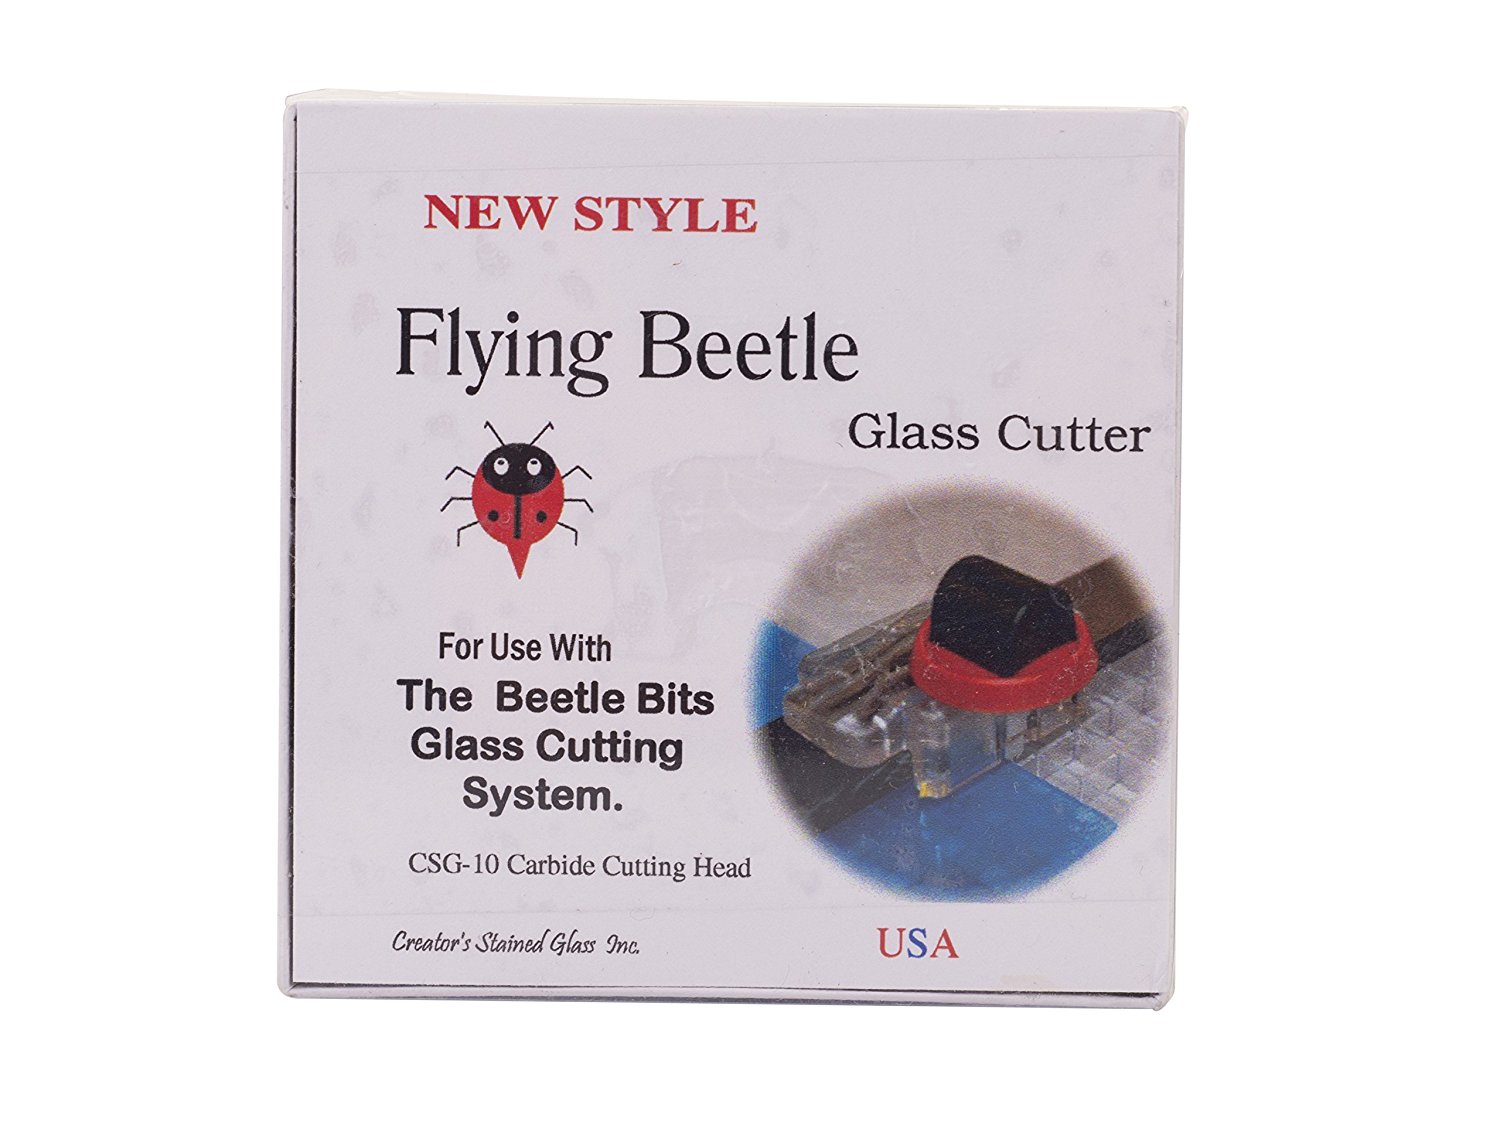 The Beetle Bits Glass Cutting System